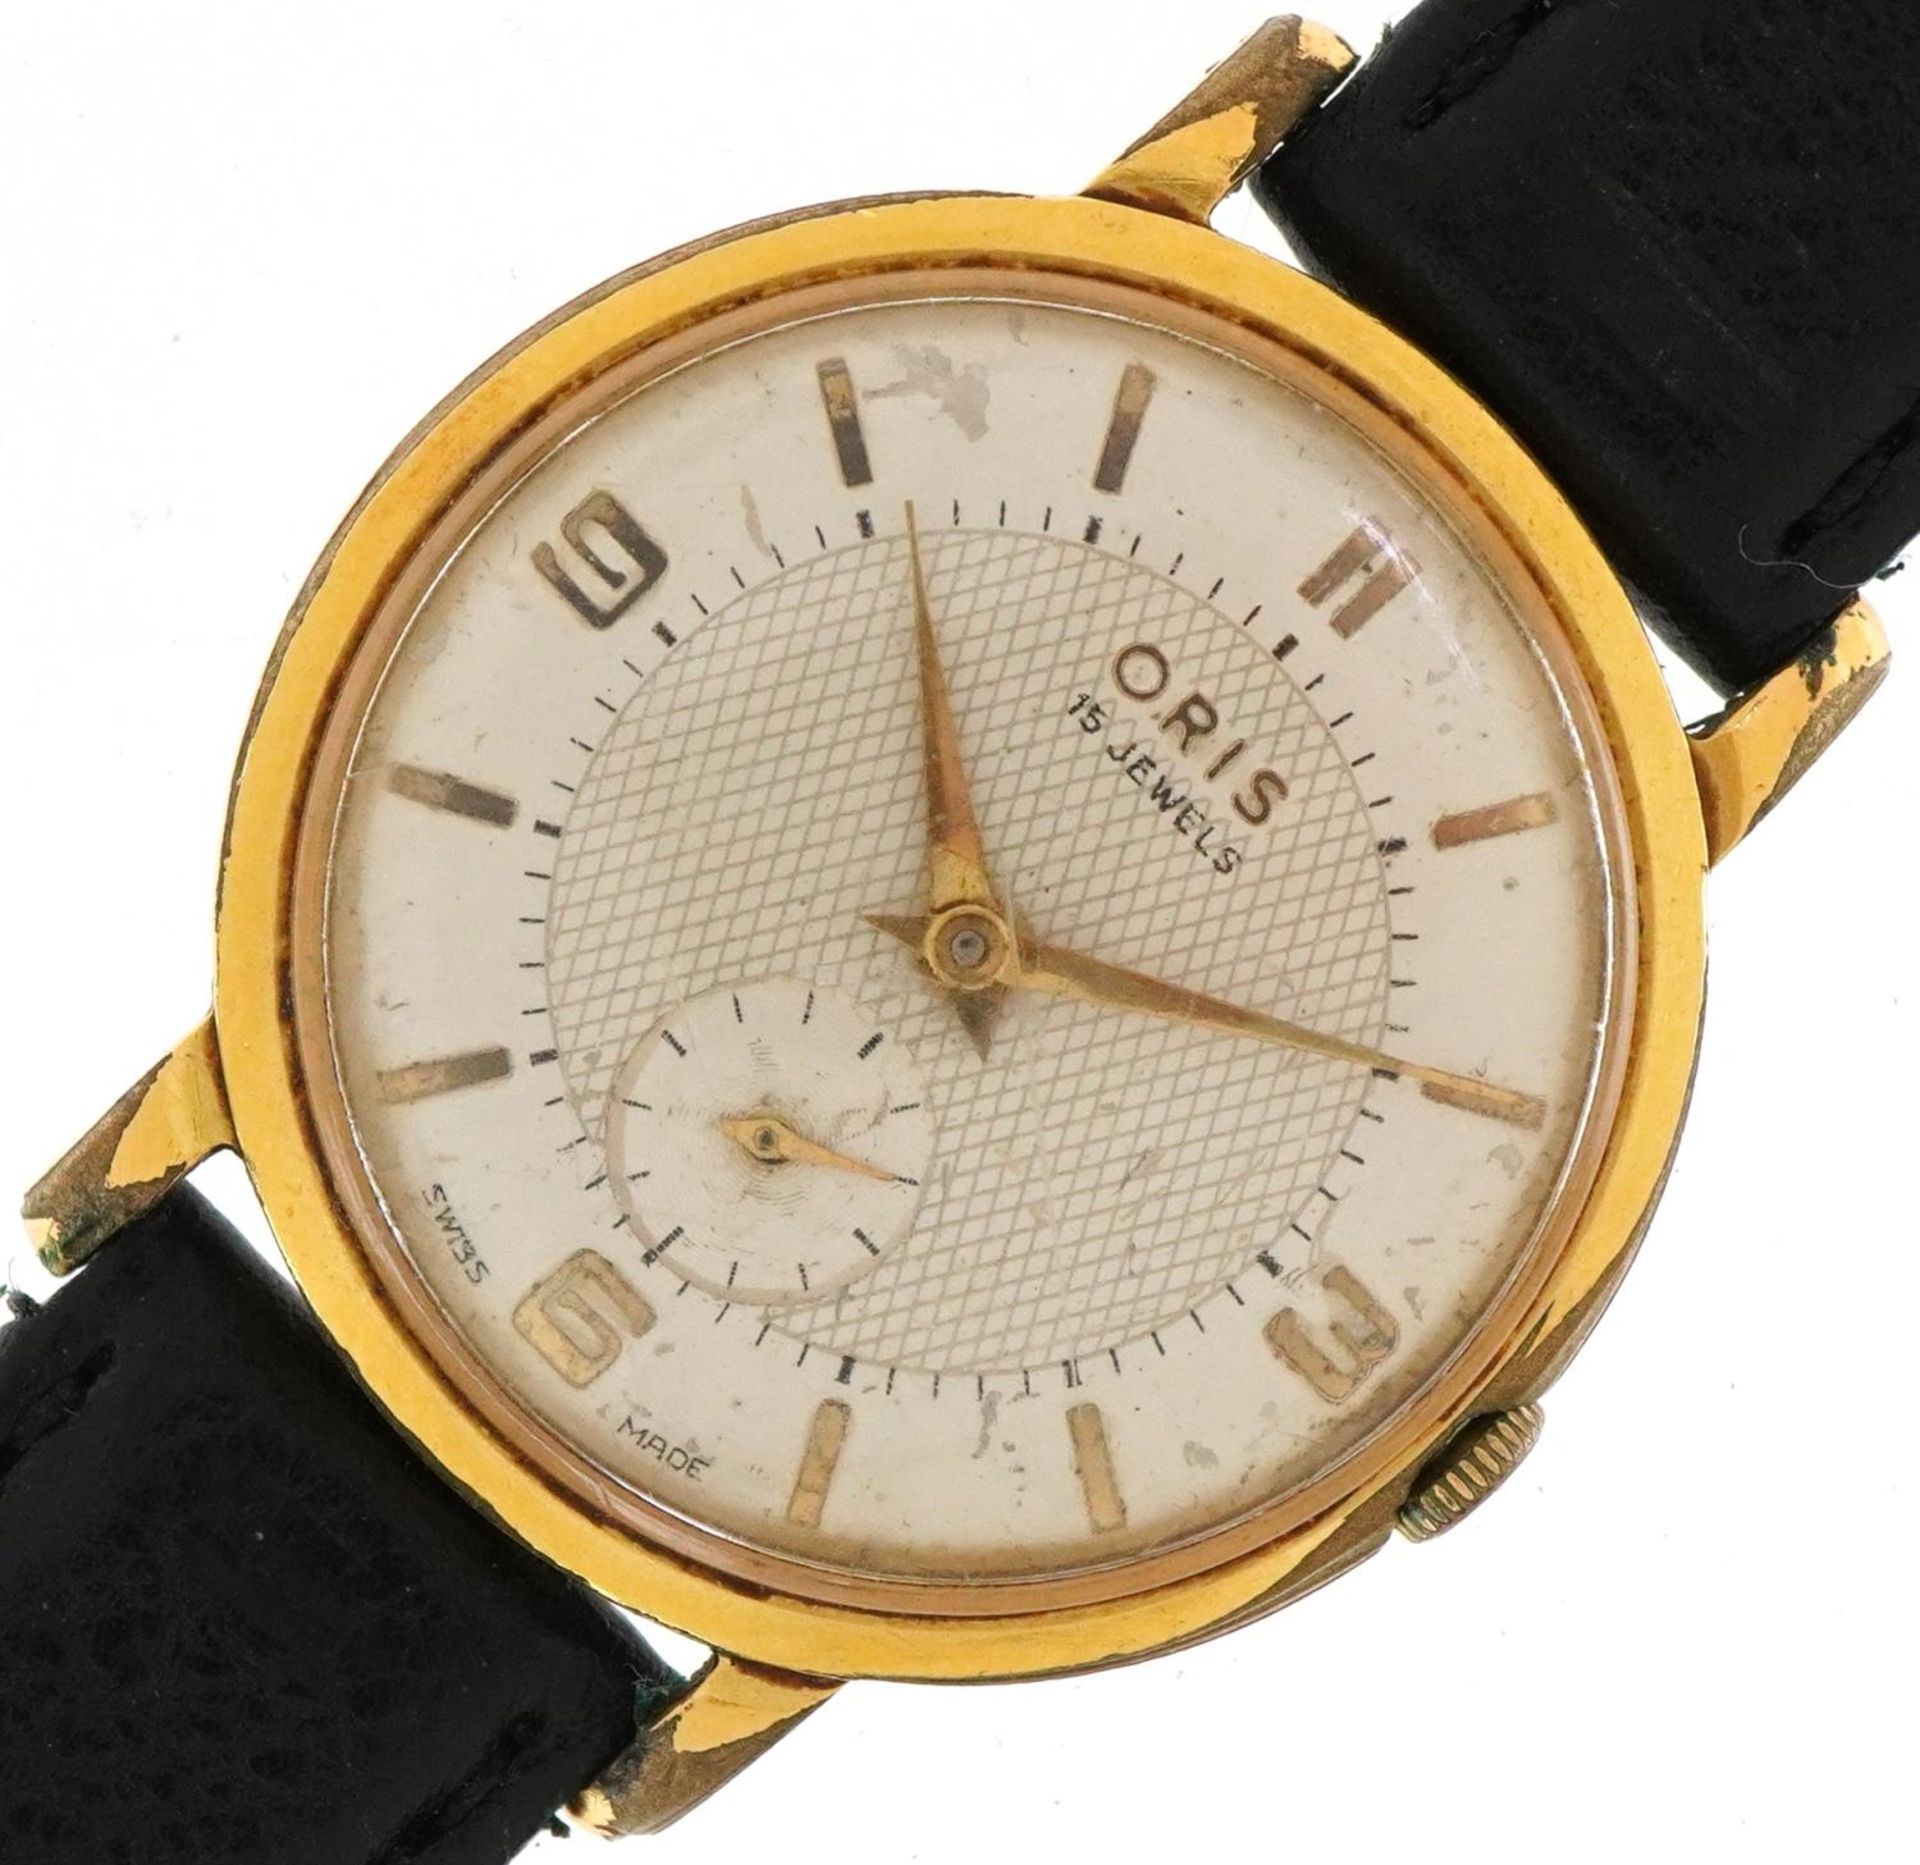 Oris, gentlemen's manual wind wristwatch having subsidiary dial with Arabic numerals, 33mm in